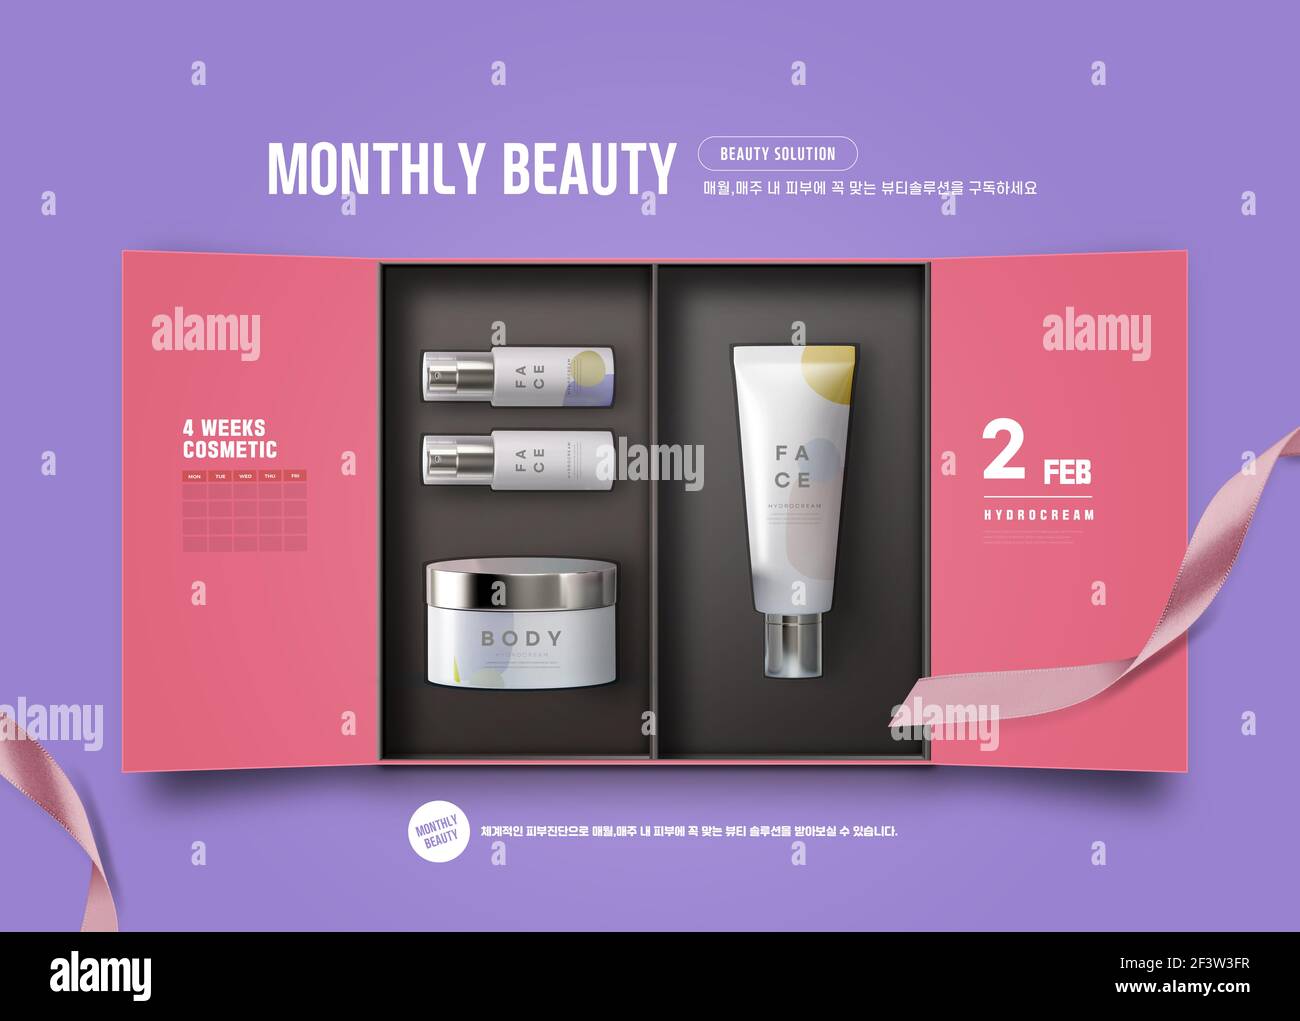 beauty subscription service poster Stock Photo